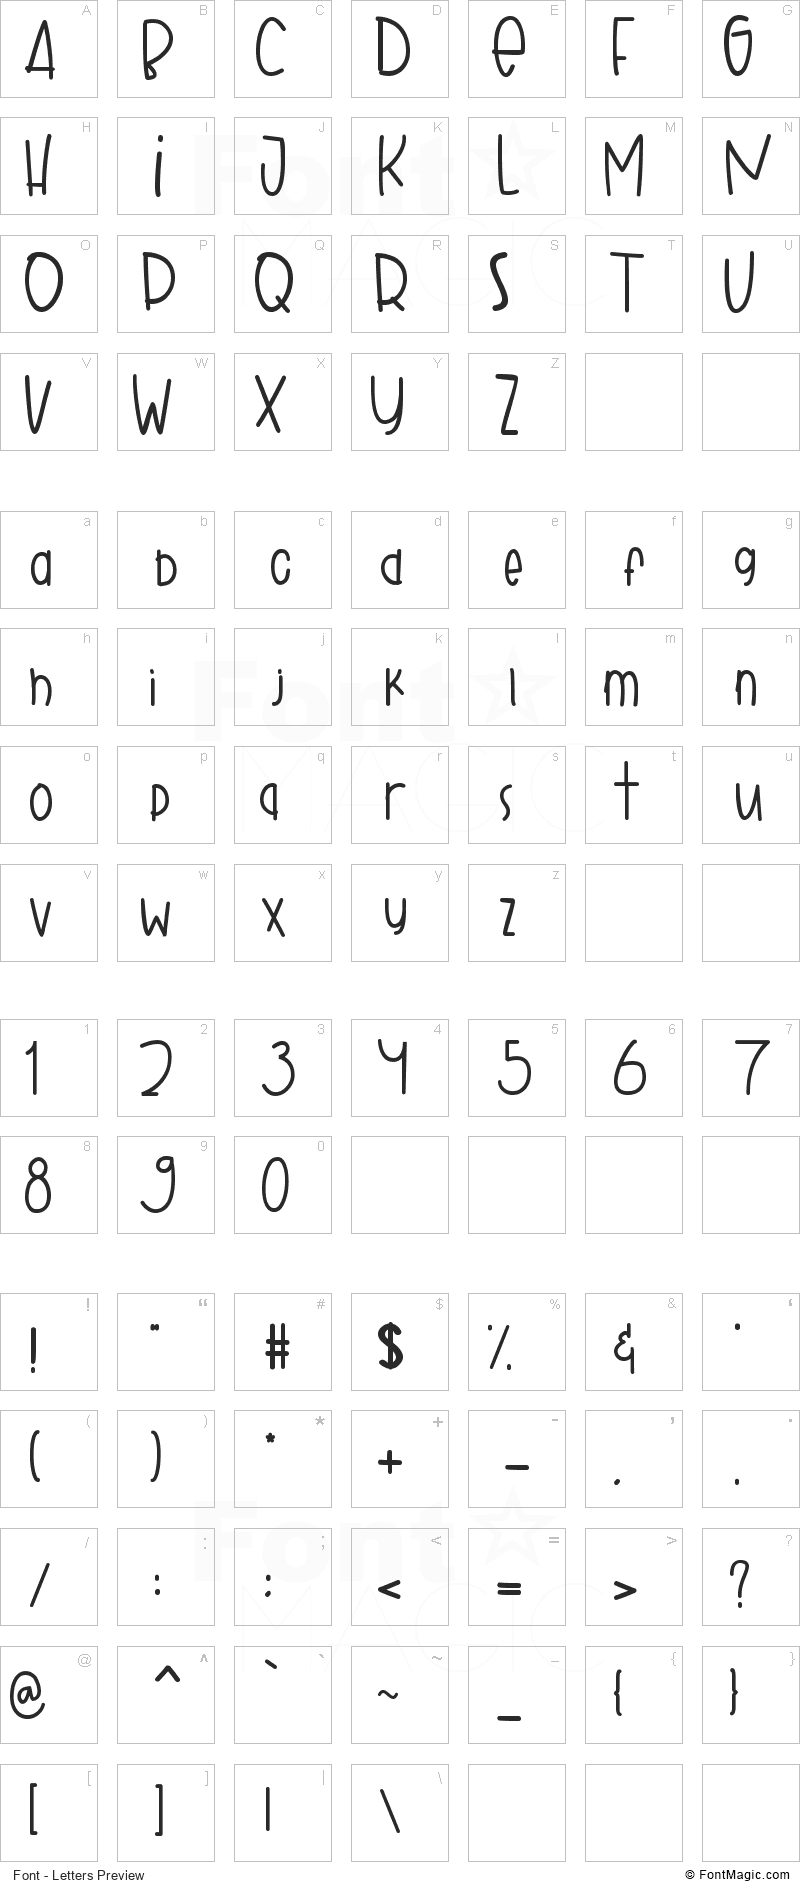 Gobbie Gobble Font - All Latters Preview Chart